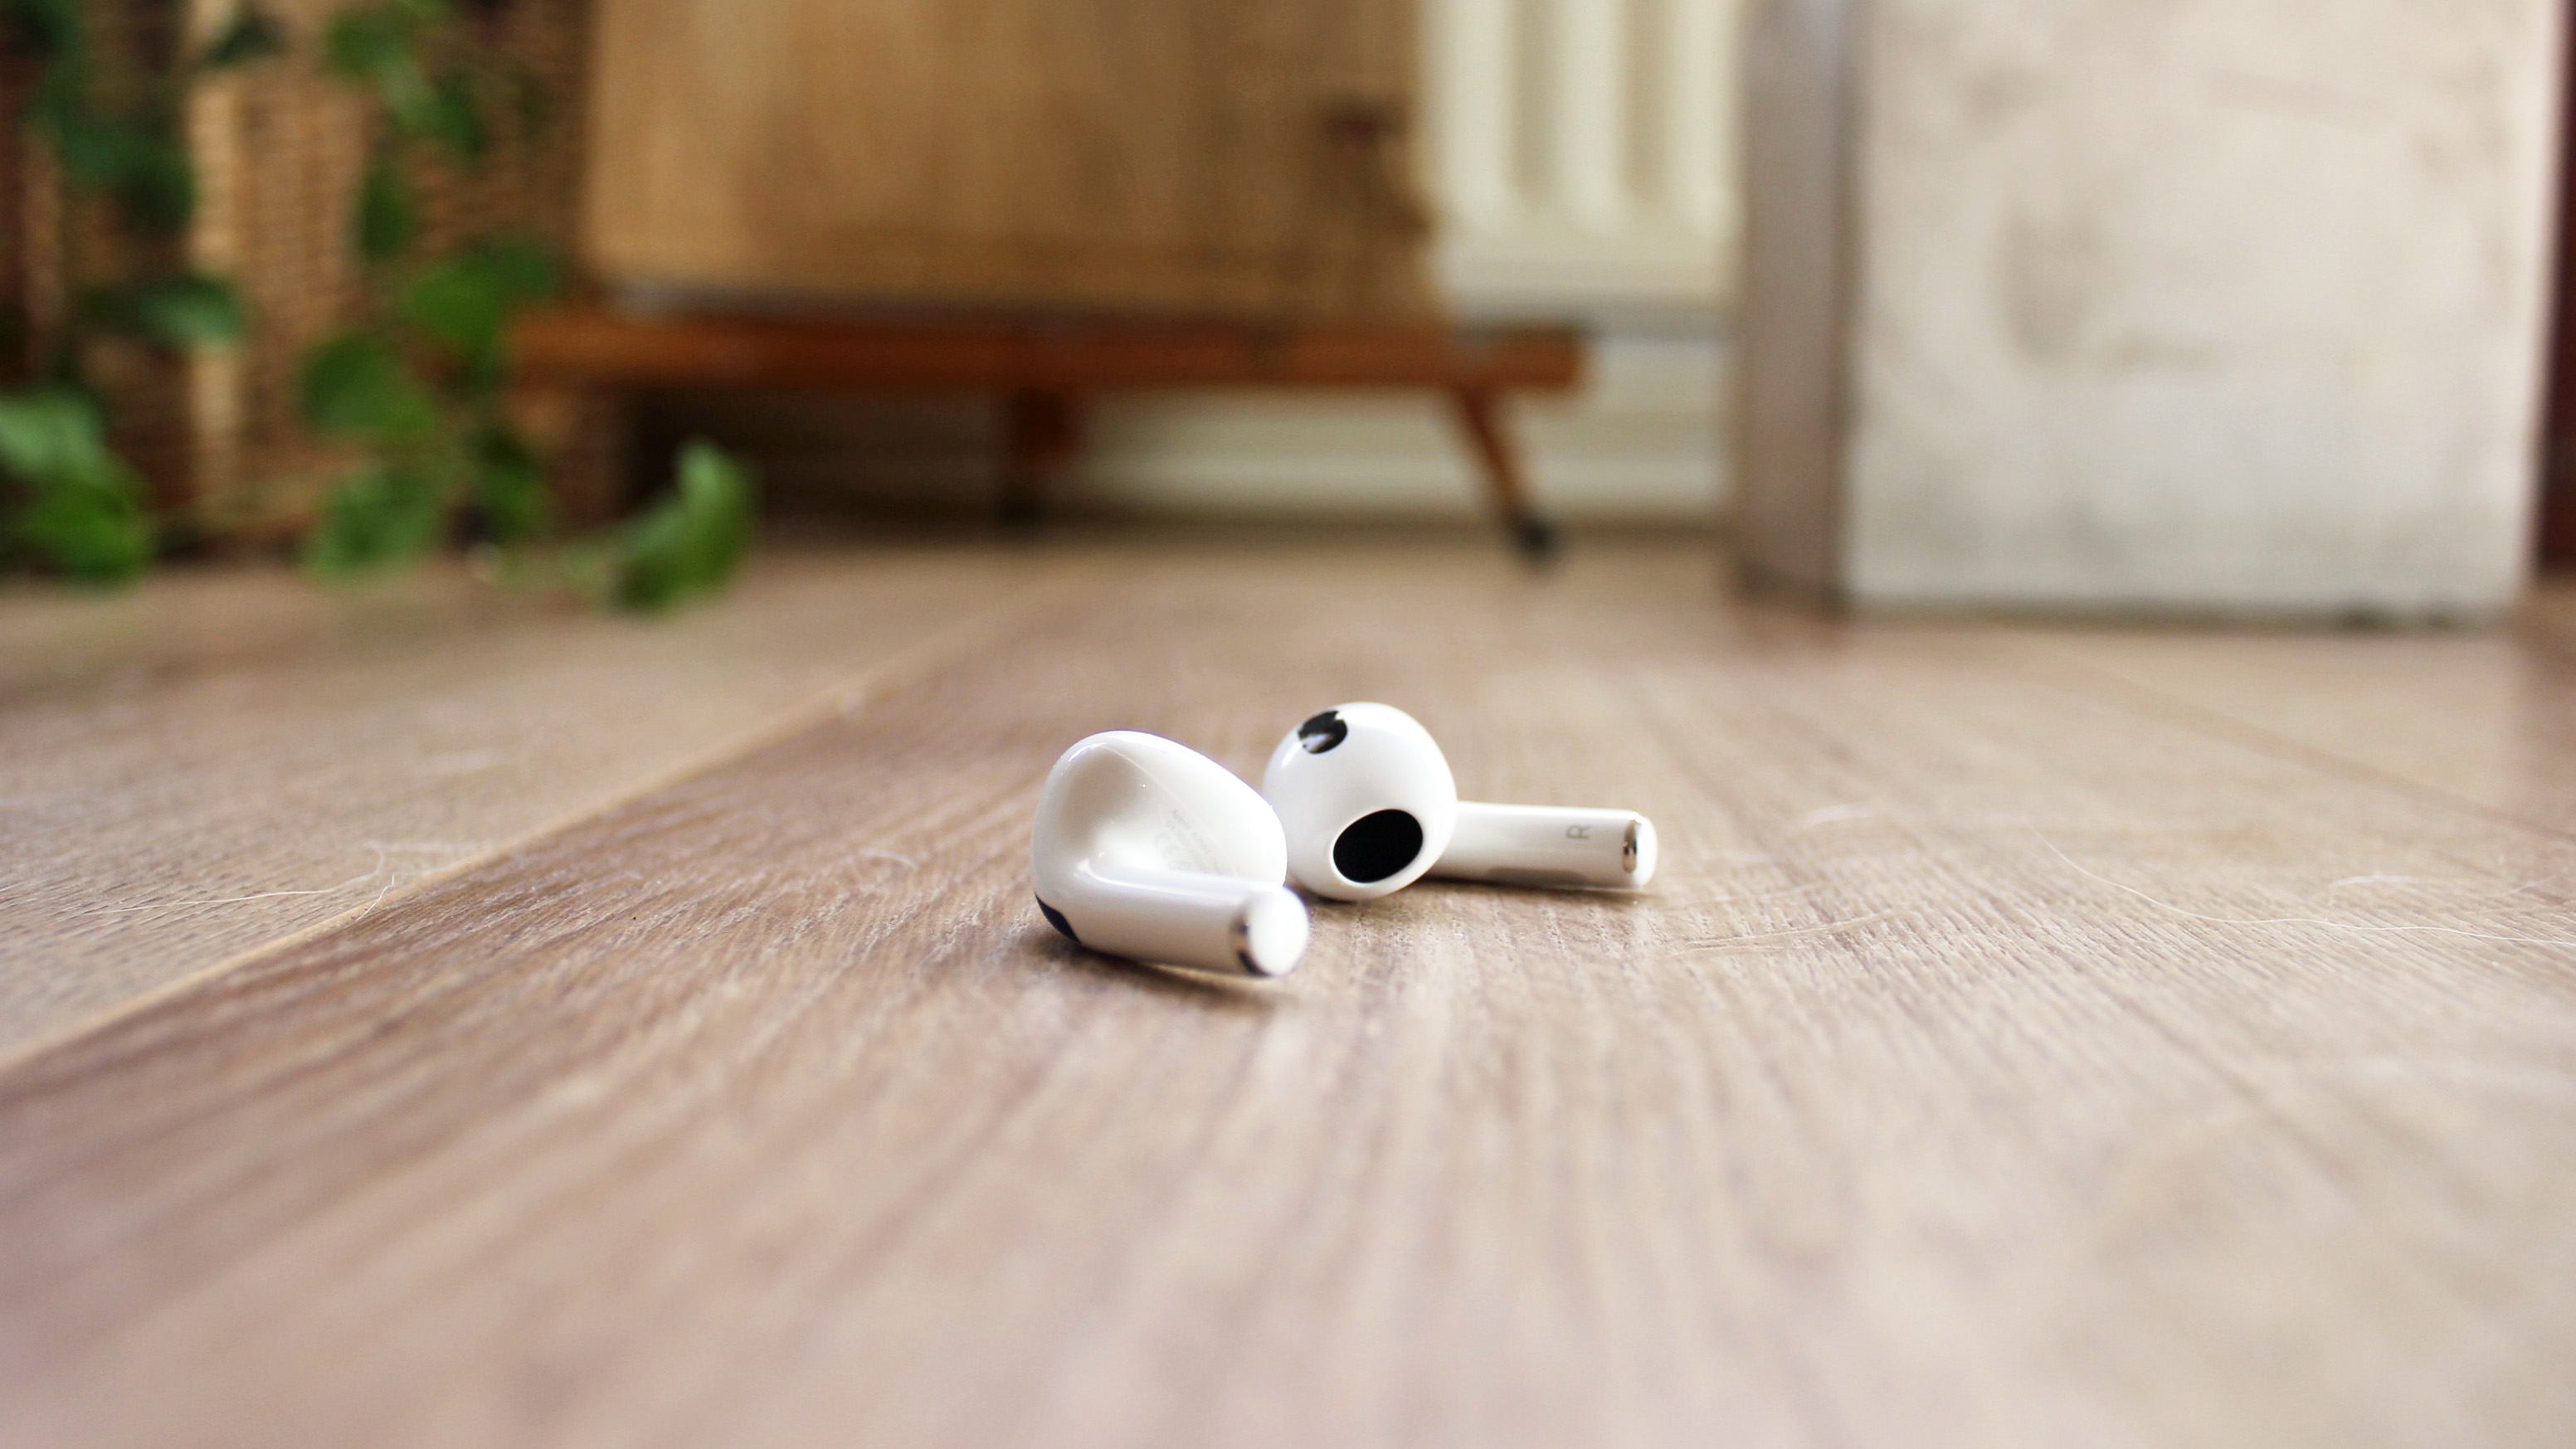 the apple airpods 3 true wireless earbuds